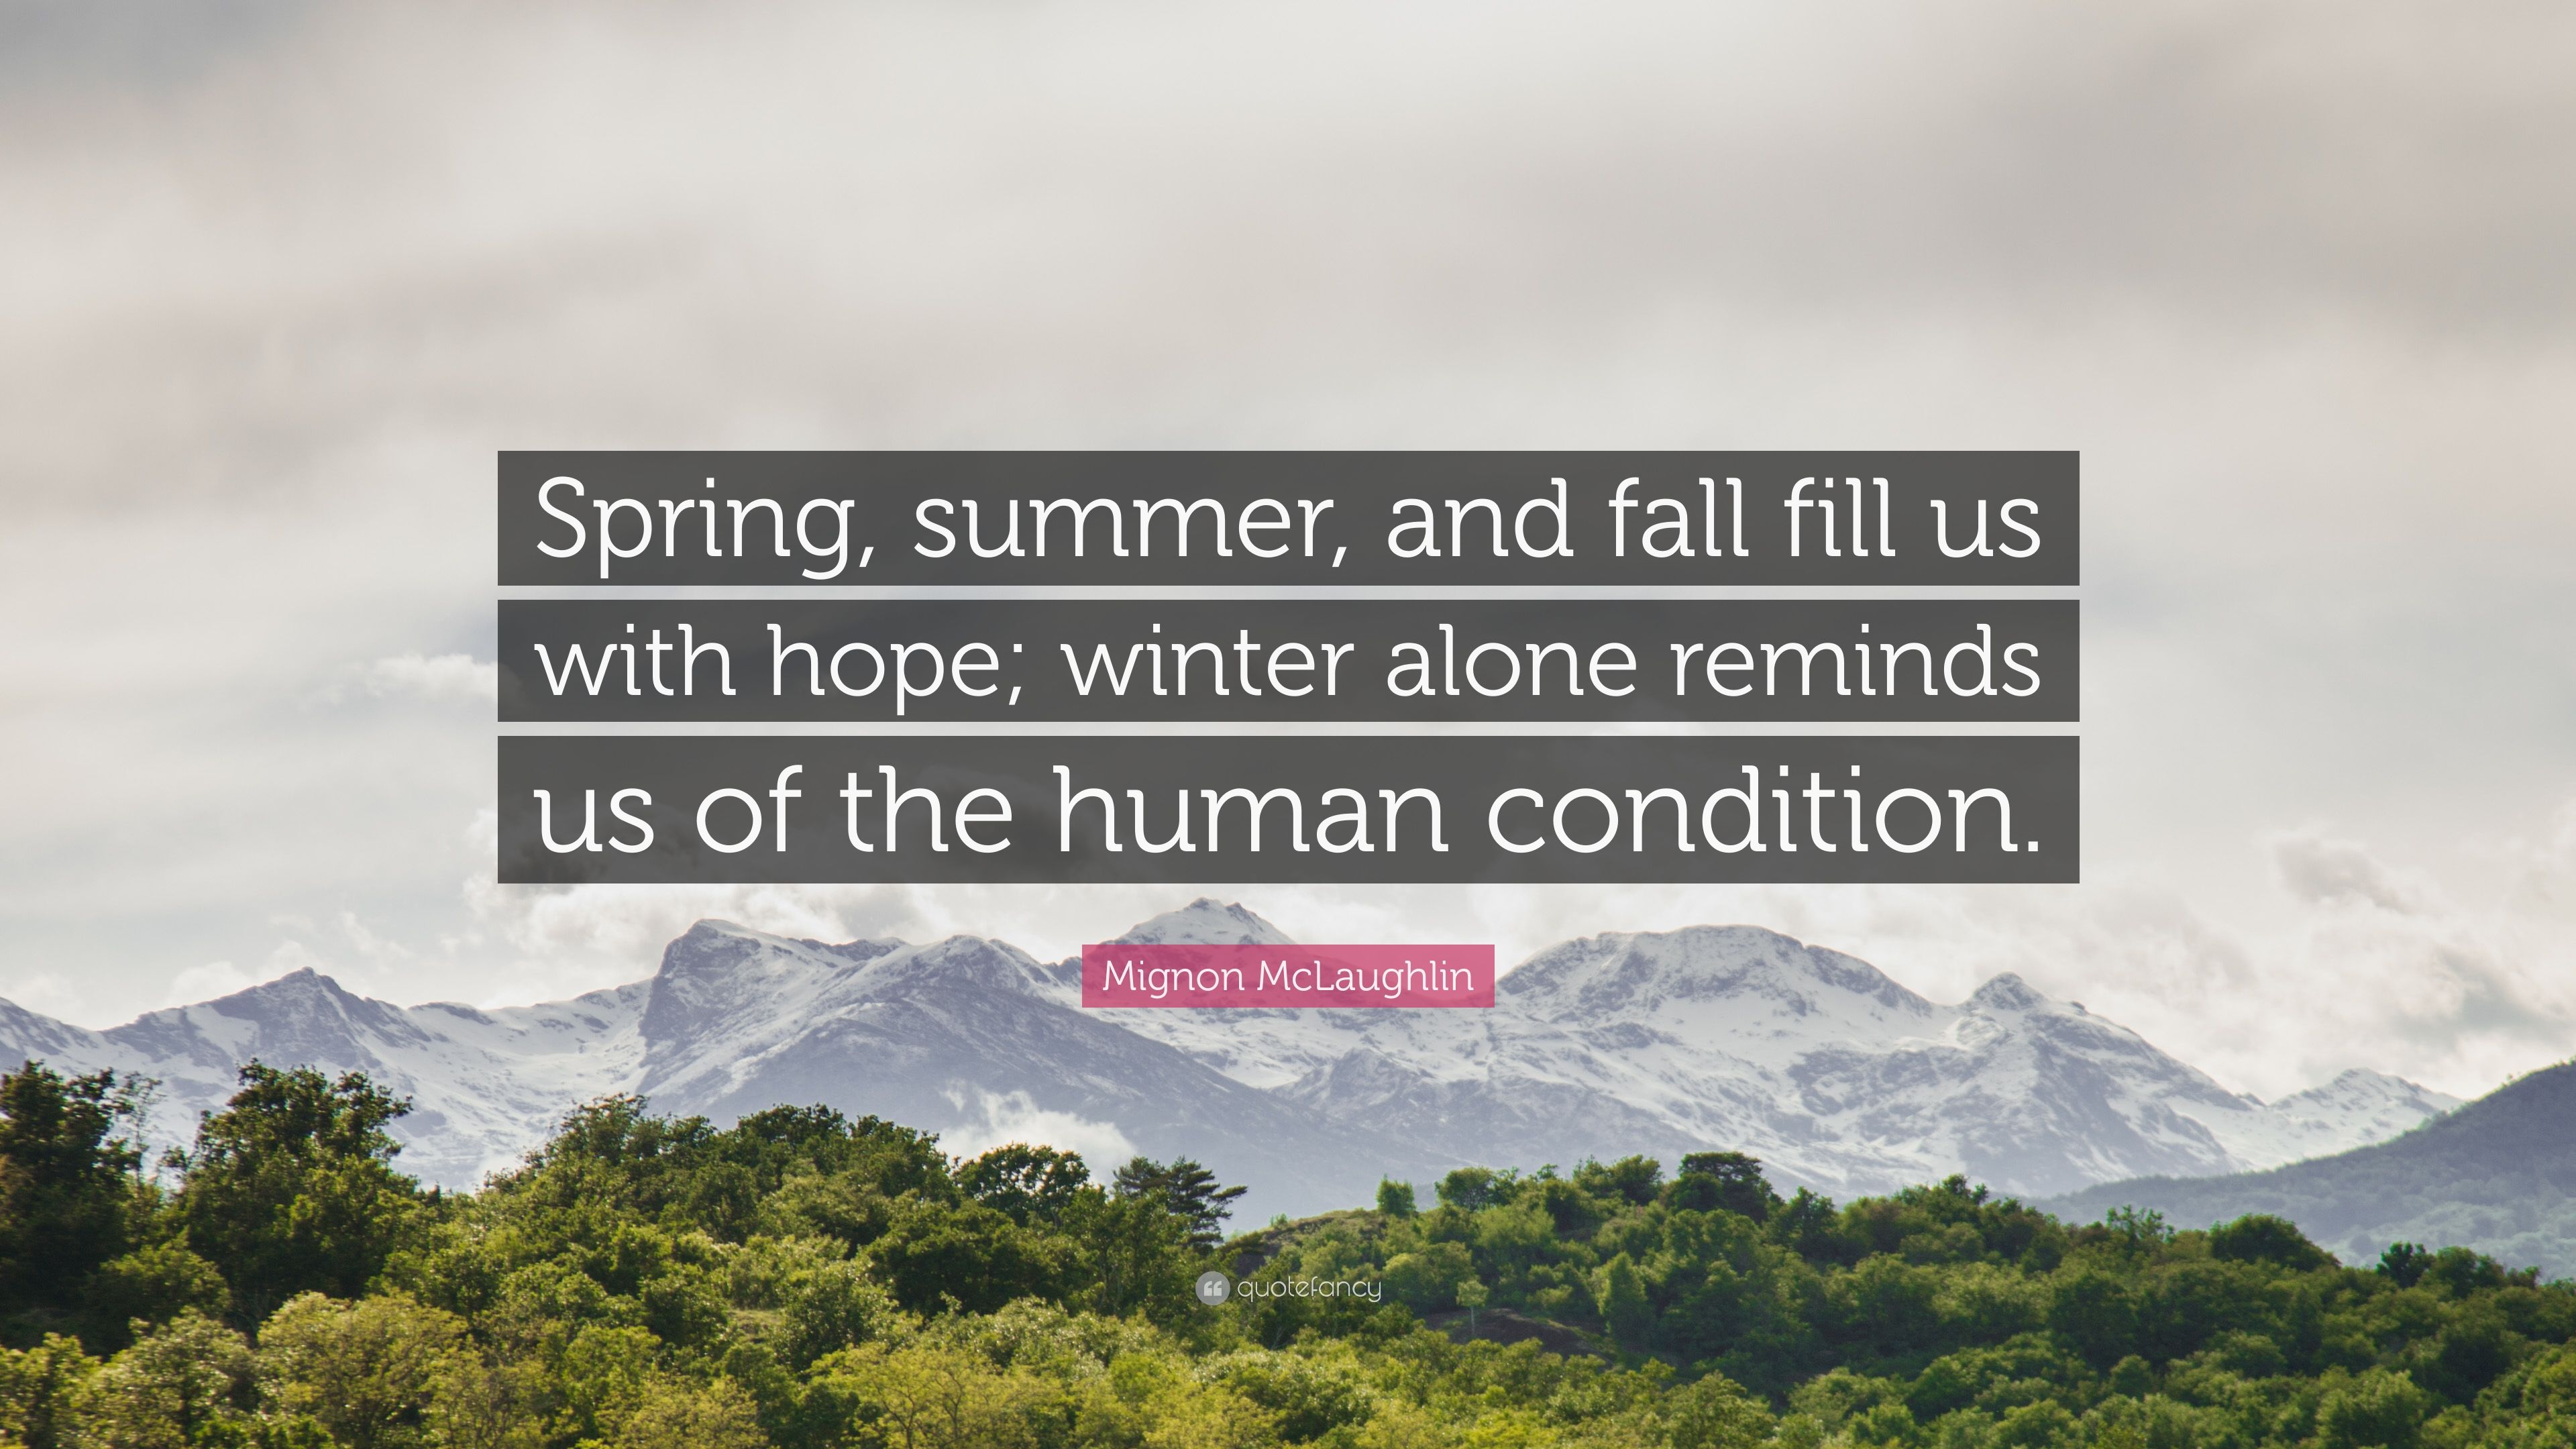 Mignon McLaughlin Quote: “Spring, summer, and fall fill us with hope; winter alone reminds us of the human condition.” (7 wallpaper)